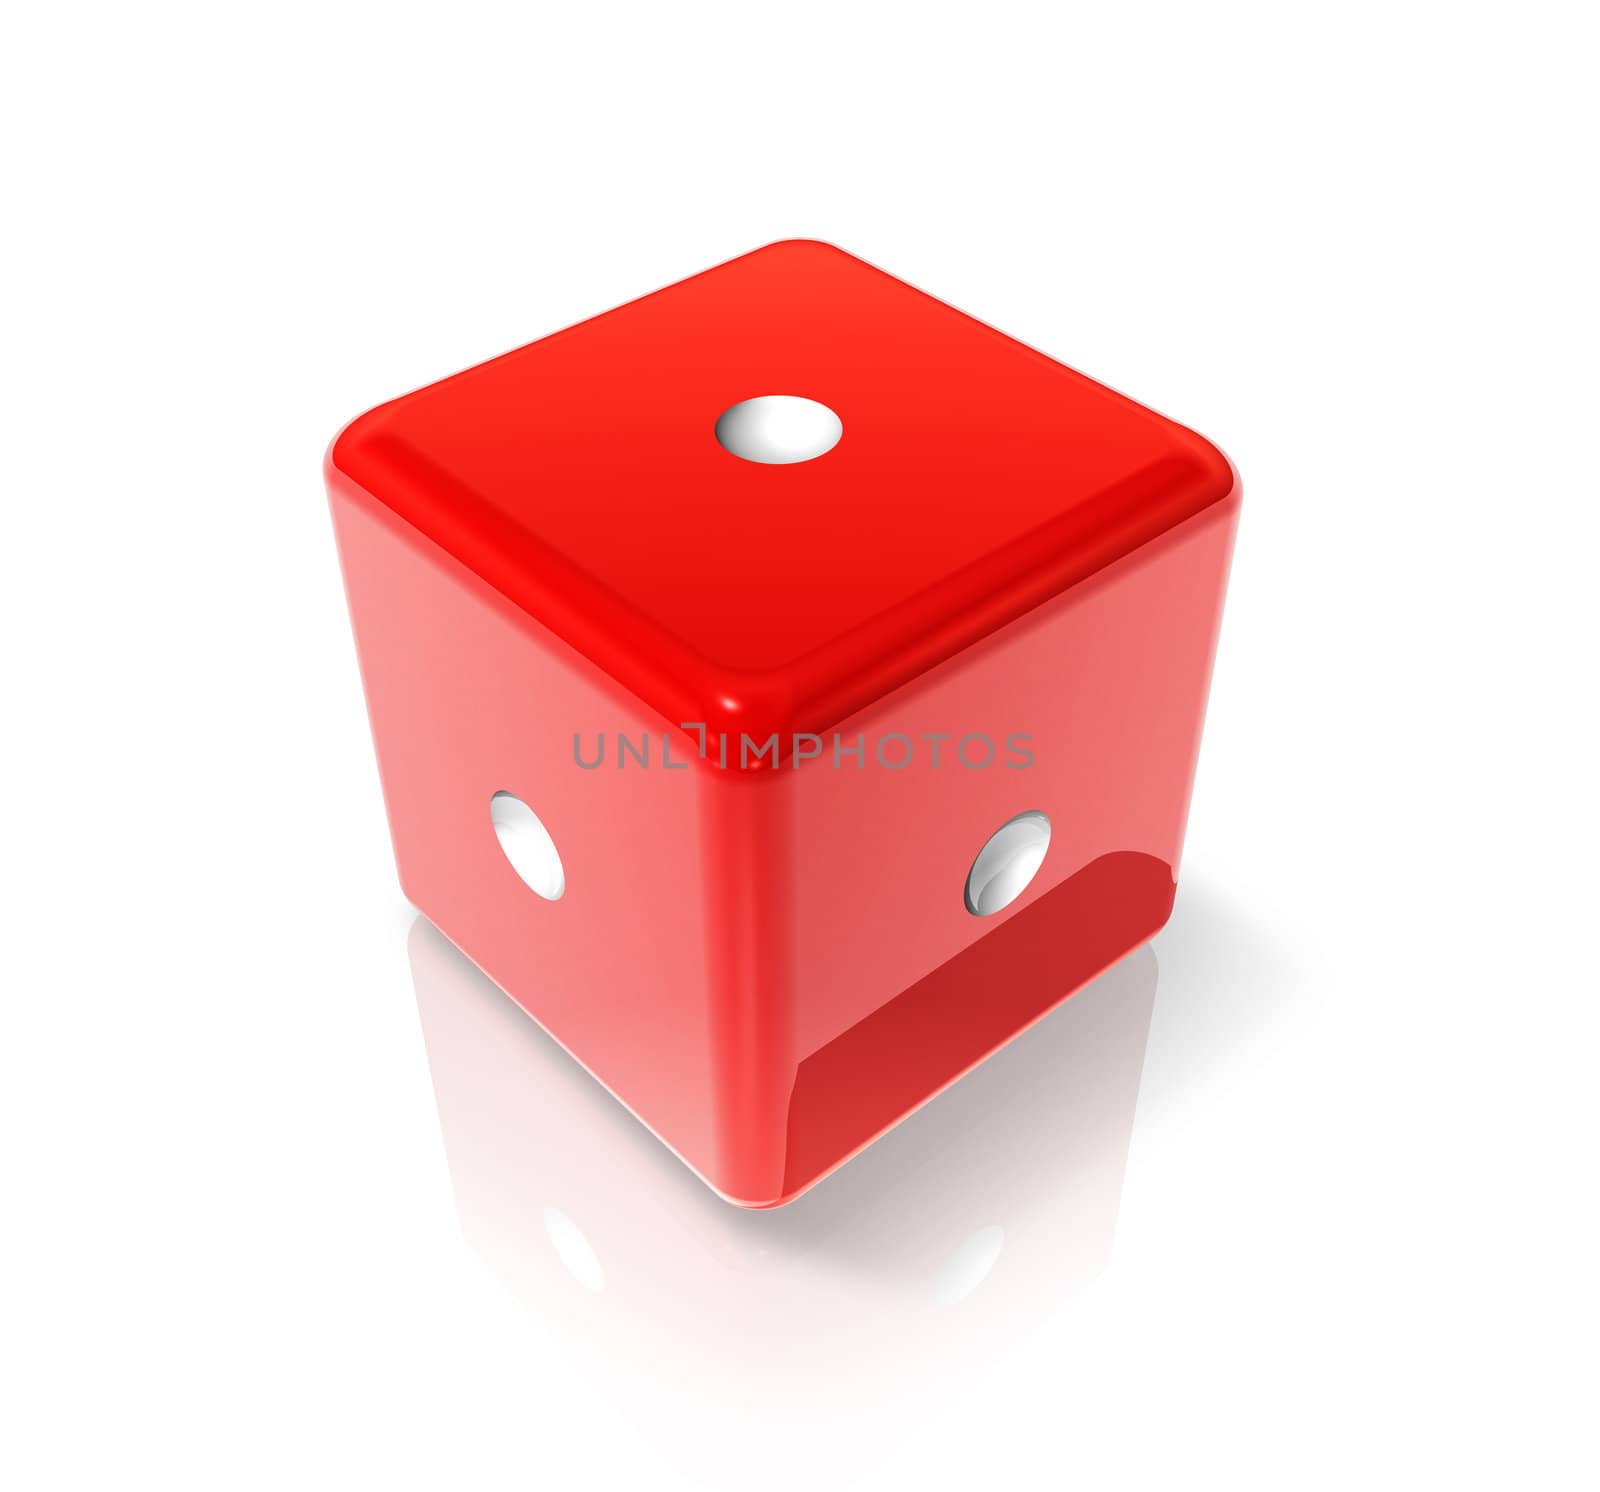 3D red dice with one dot on all sides